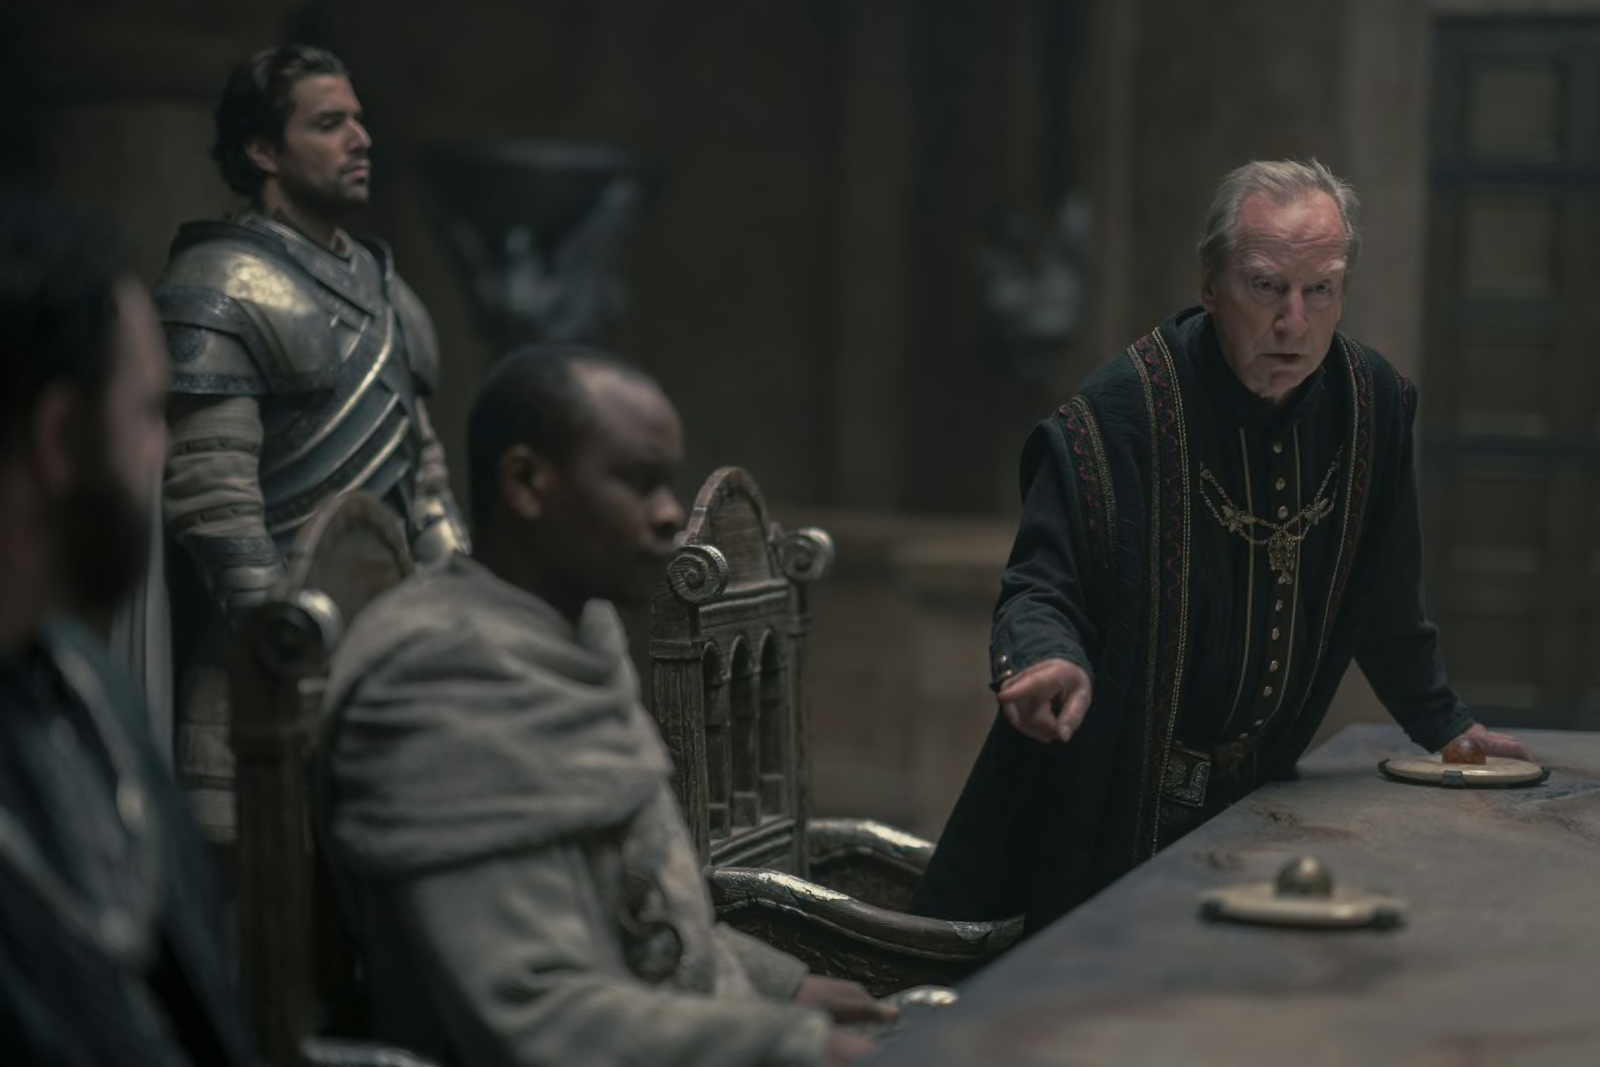 House of the Dragon Episode 9 Review: The Green Council